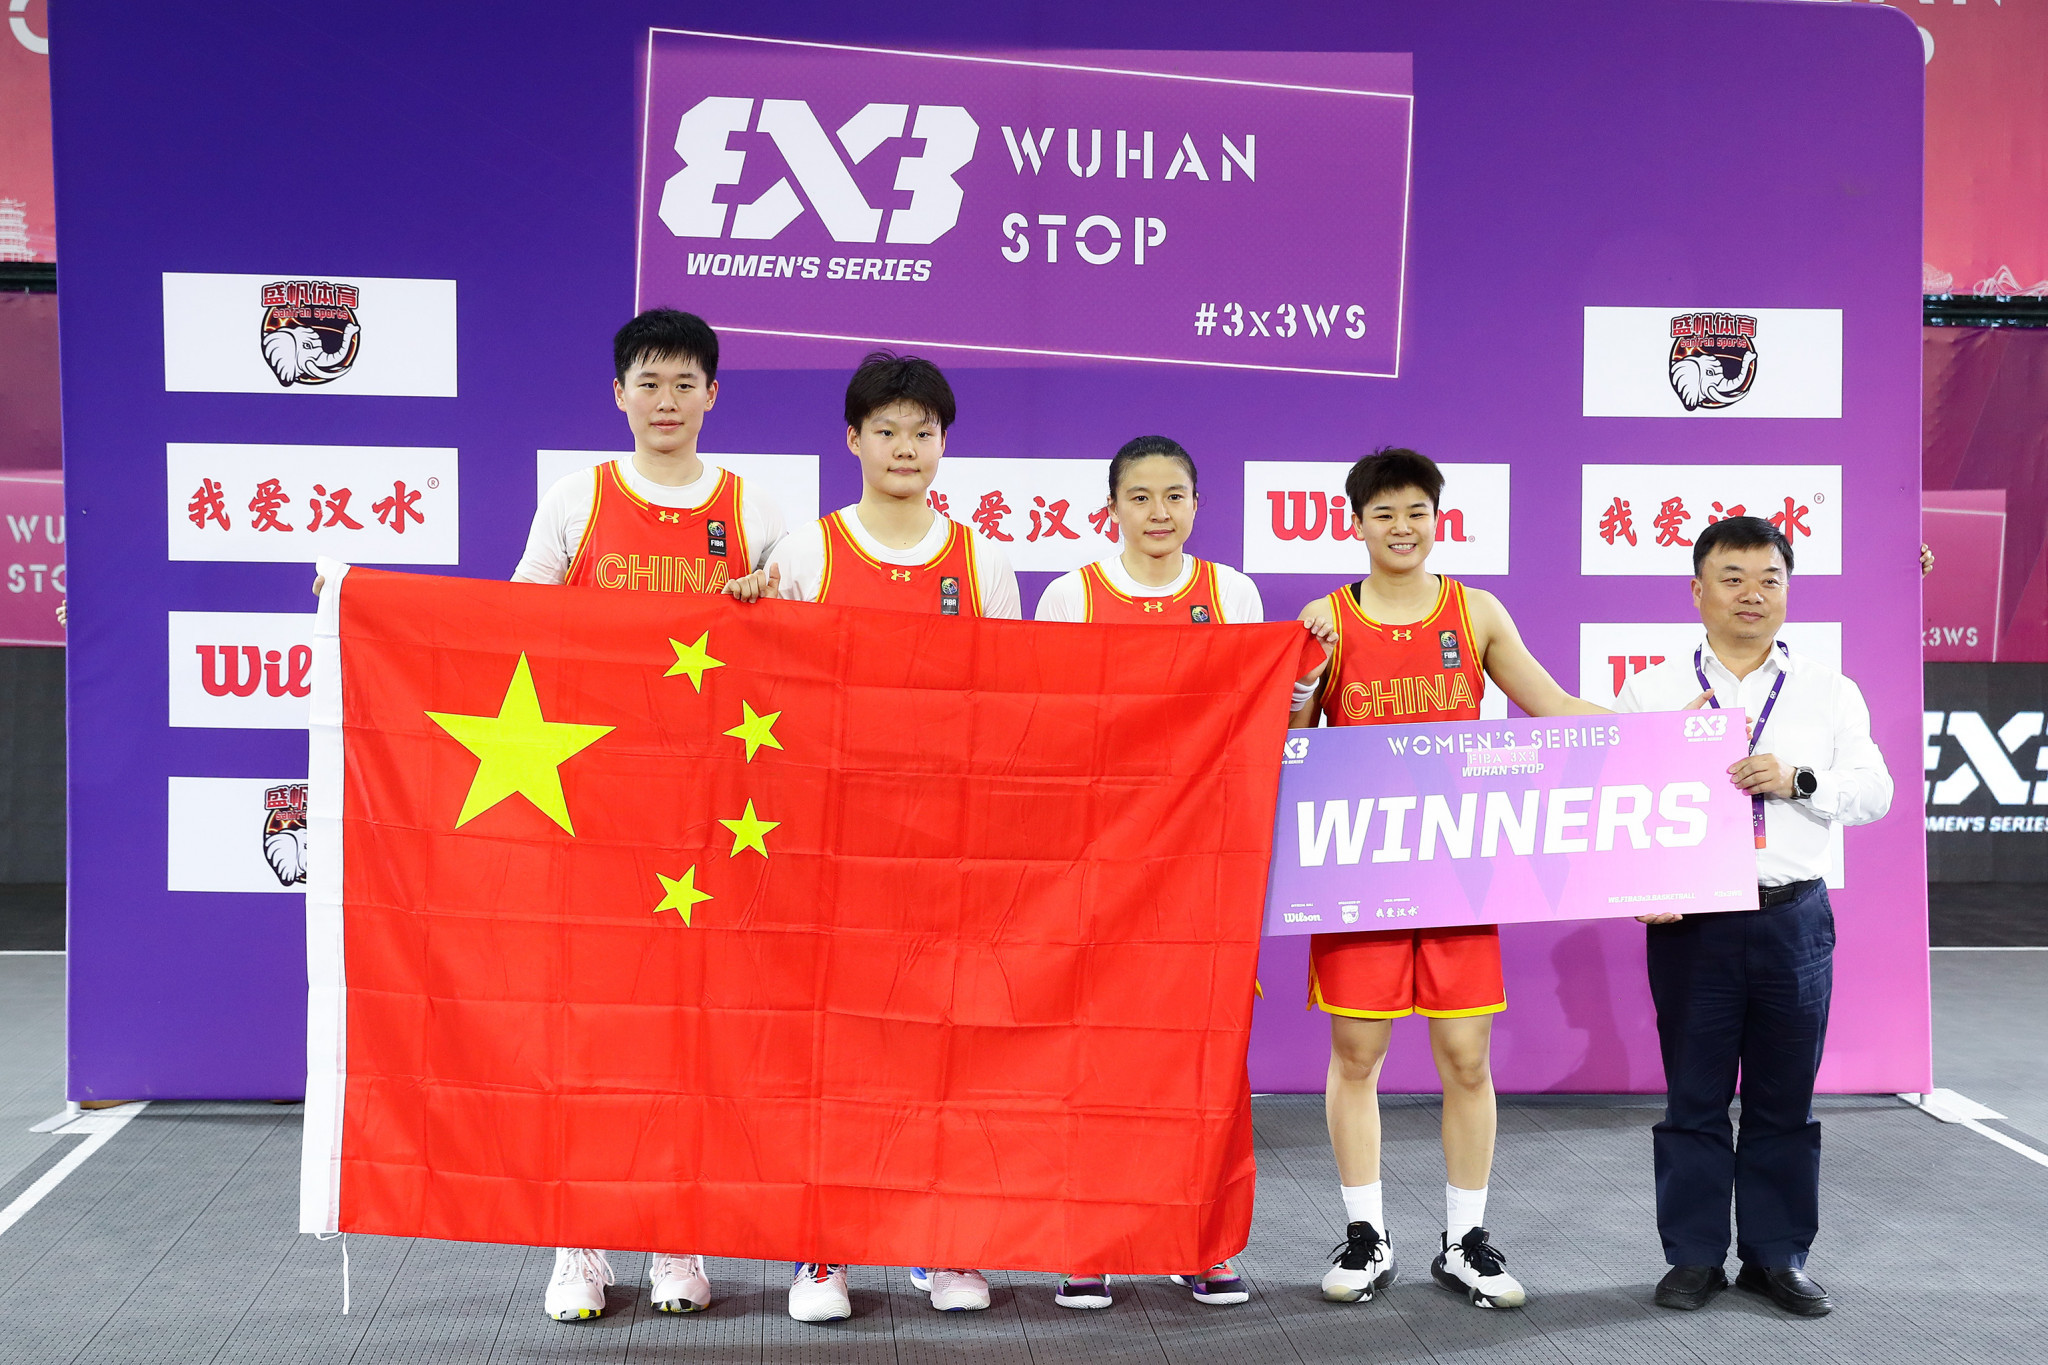 China won the first FIBA Women’s 3x3 Series of the new season in Wuhan without dropping a single match ©Getty Images